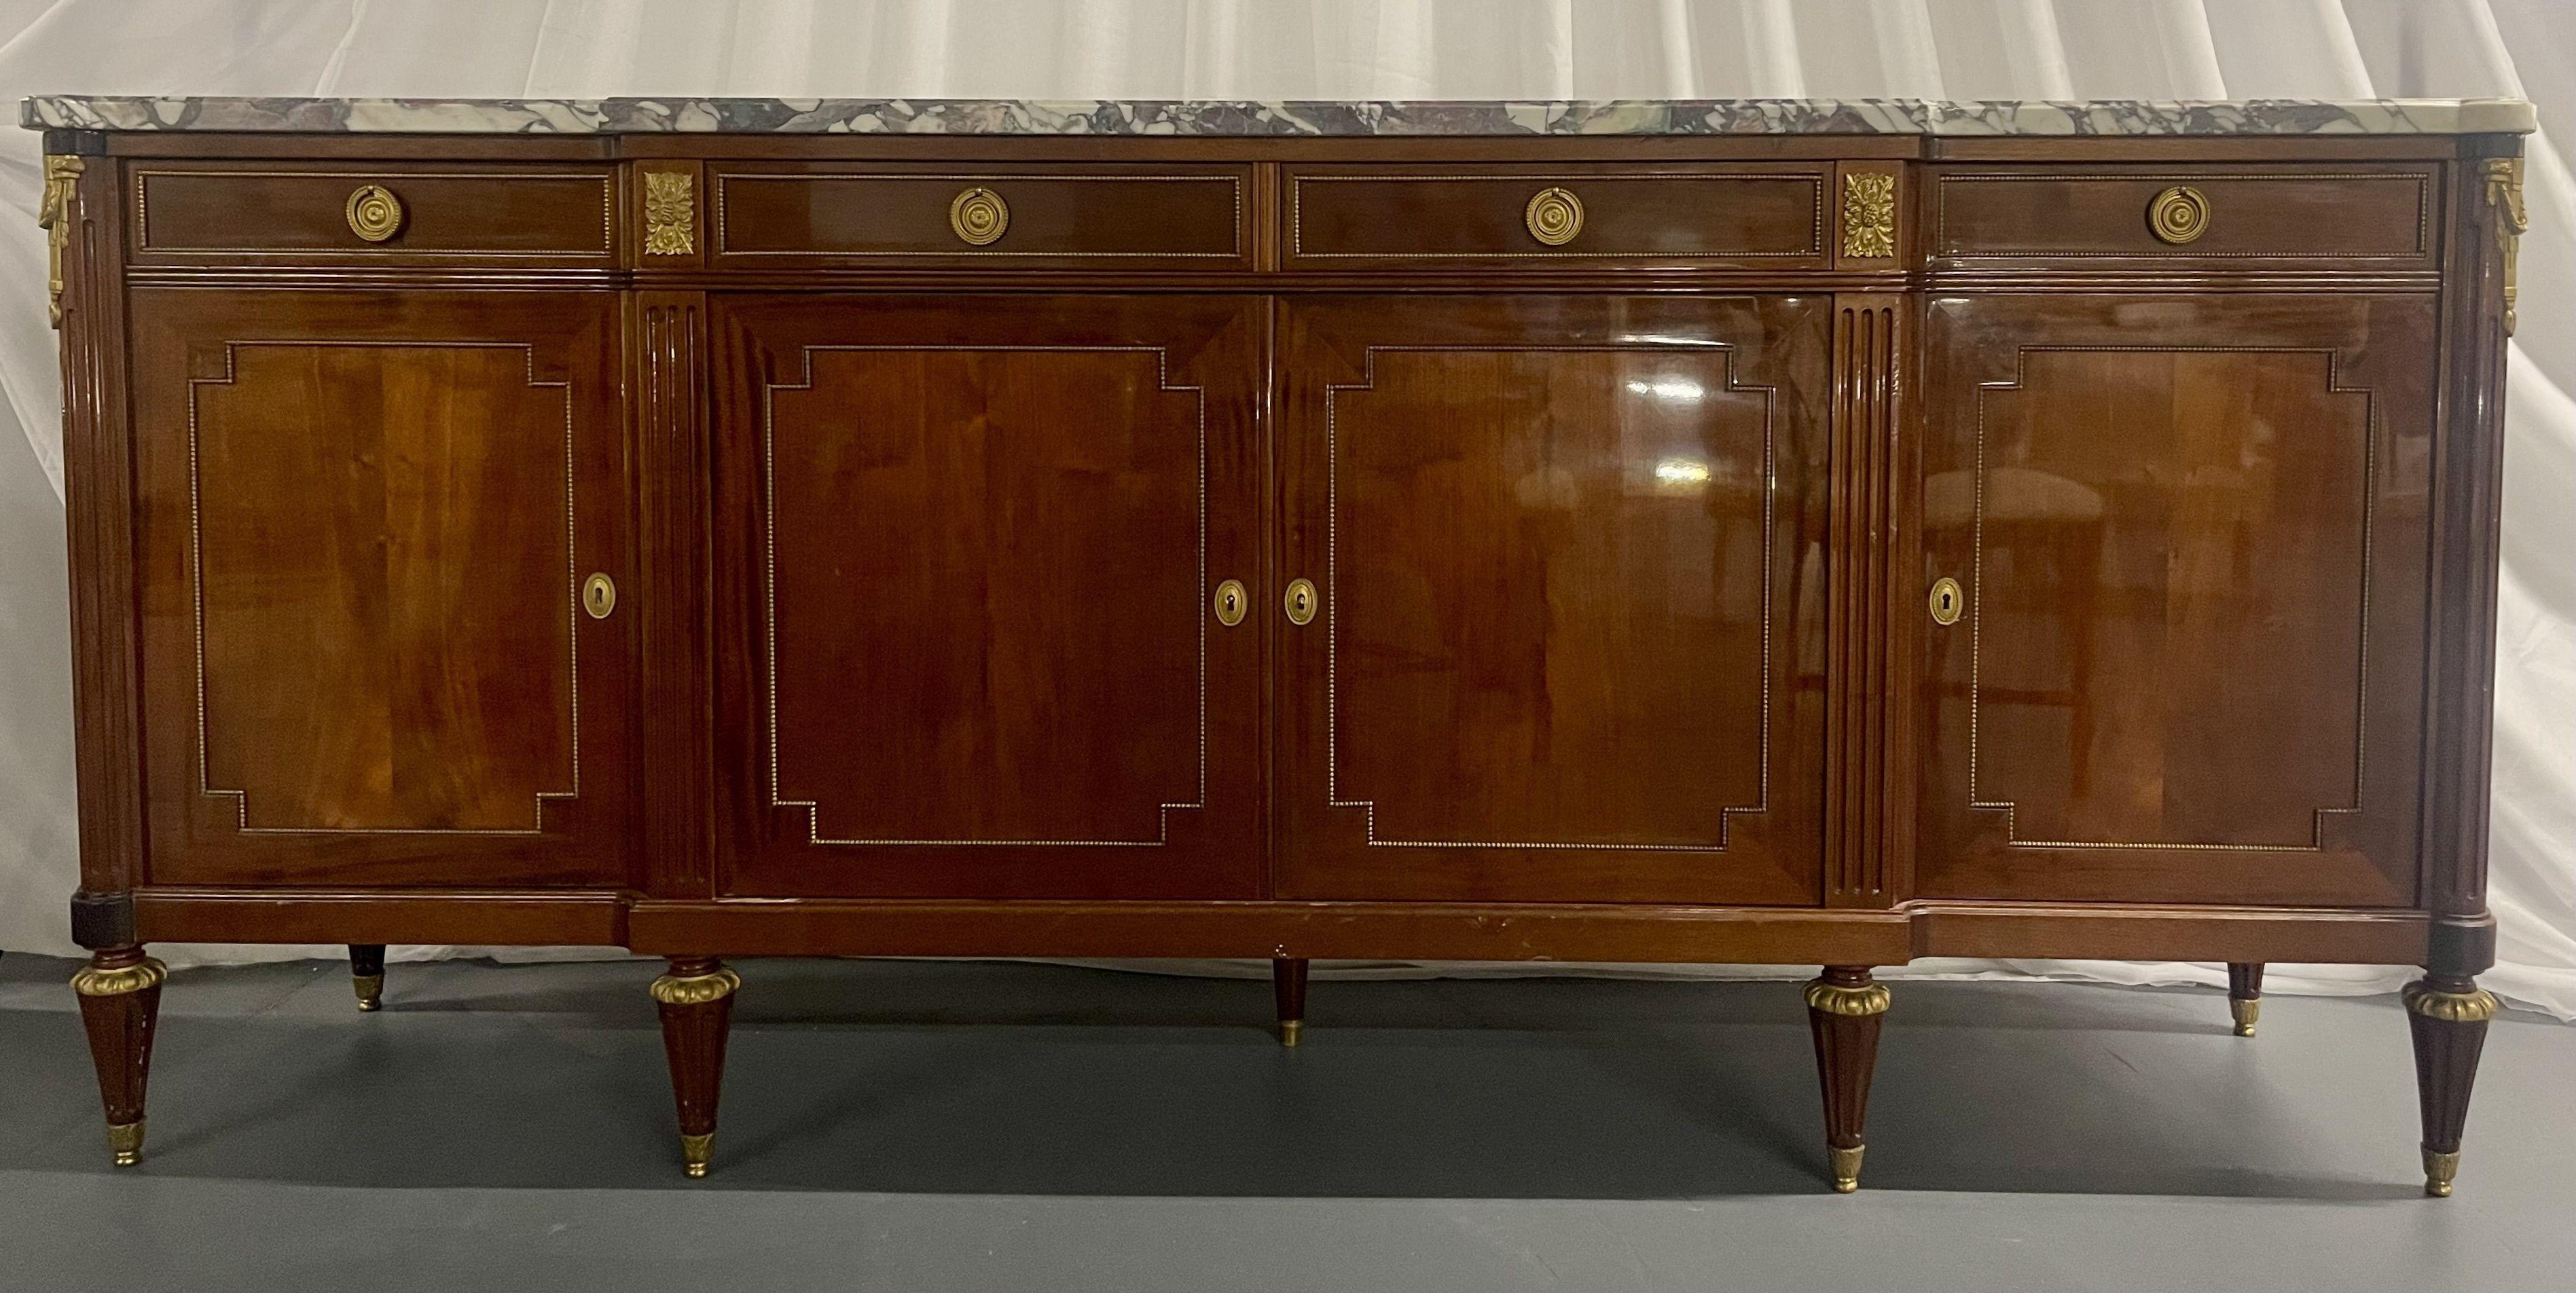 French Maison Jansen Louis XVI Style Sideboard, Cabinet, Credenza, Bronze, Marble Top For Sale